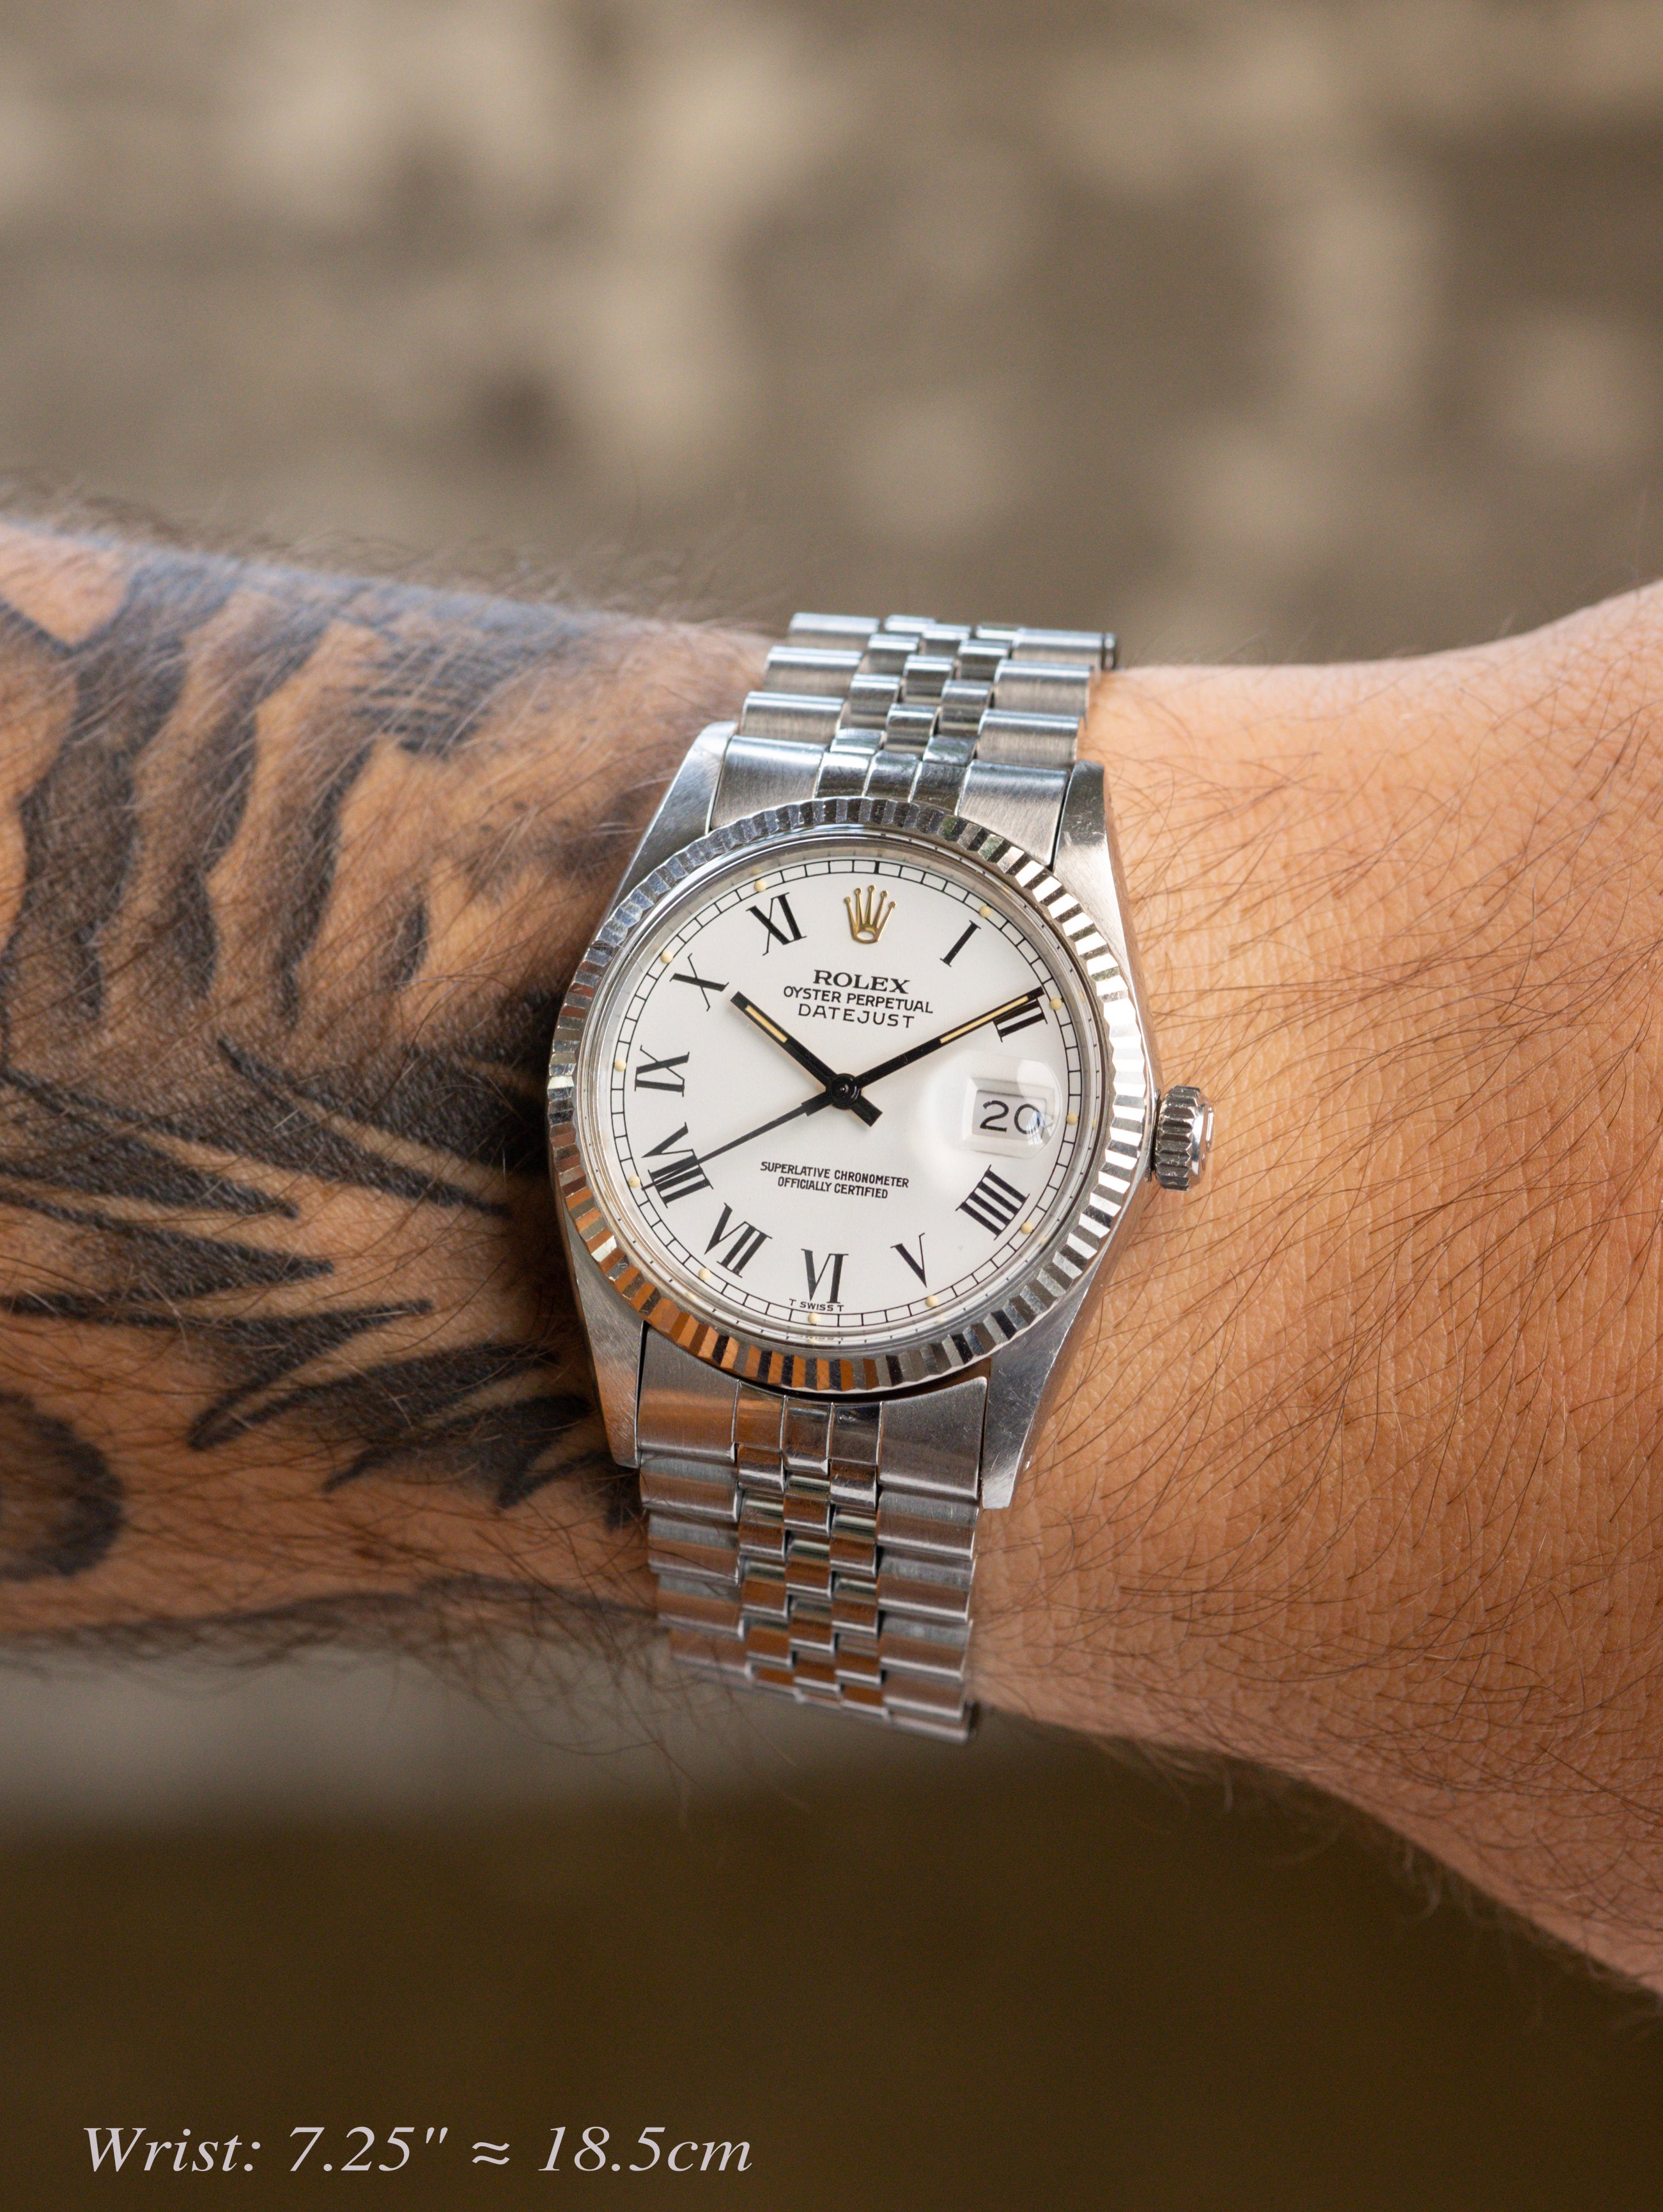 Rolex Datejust Ref. 16014 - 'Buckley' Dial Unpolished